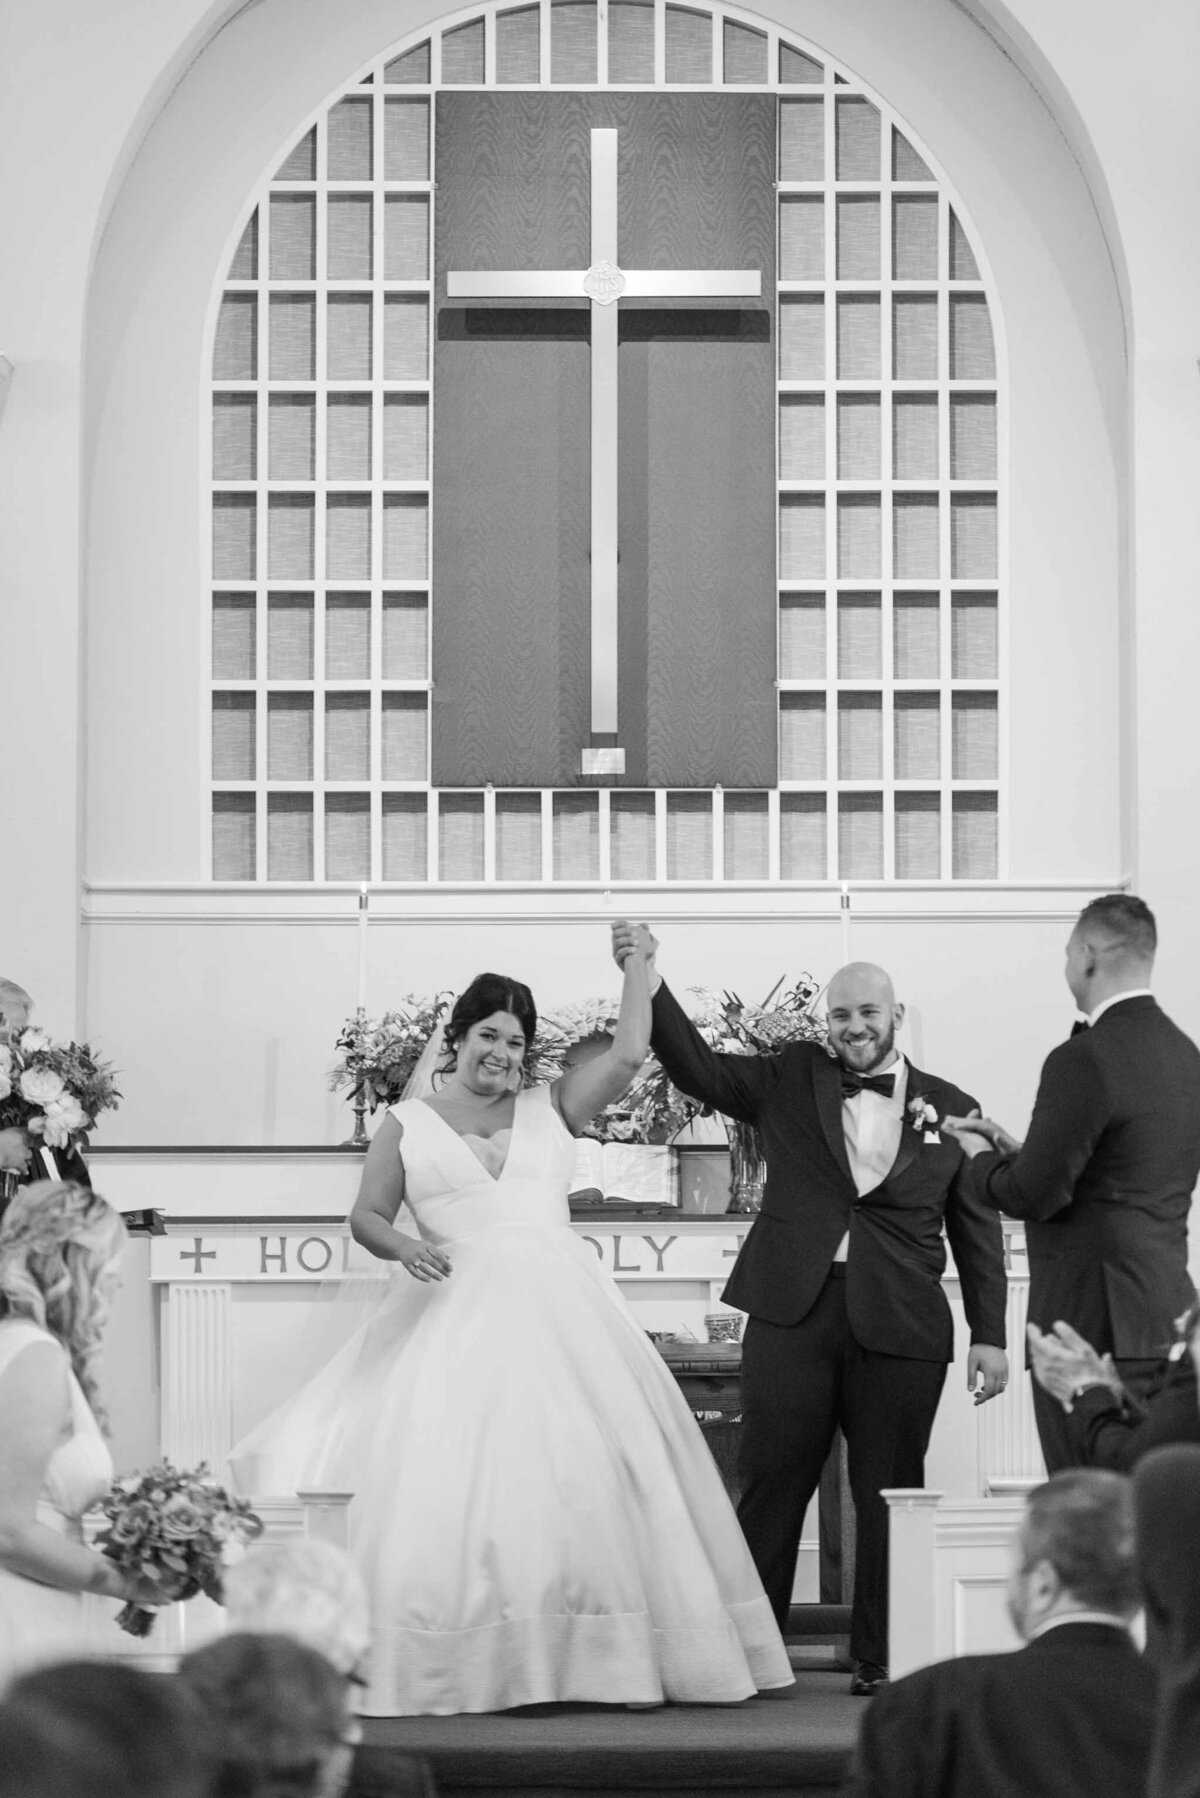 couple cheering after wedding ceremony